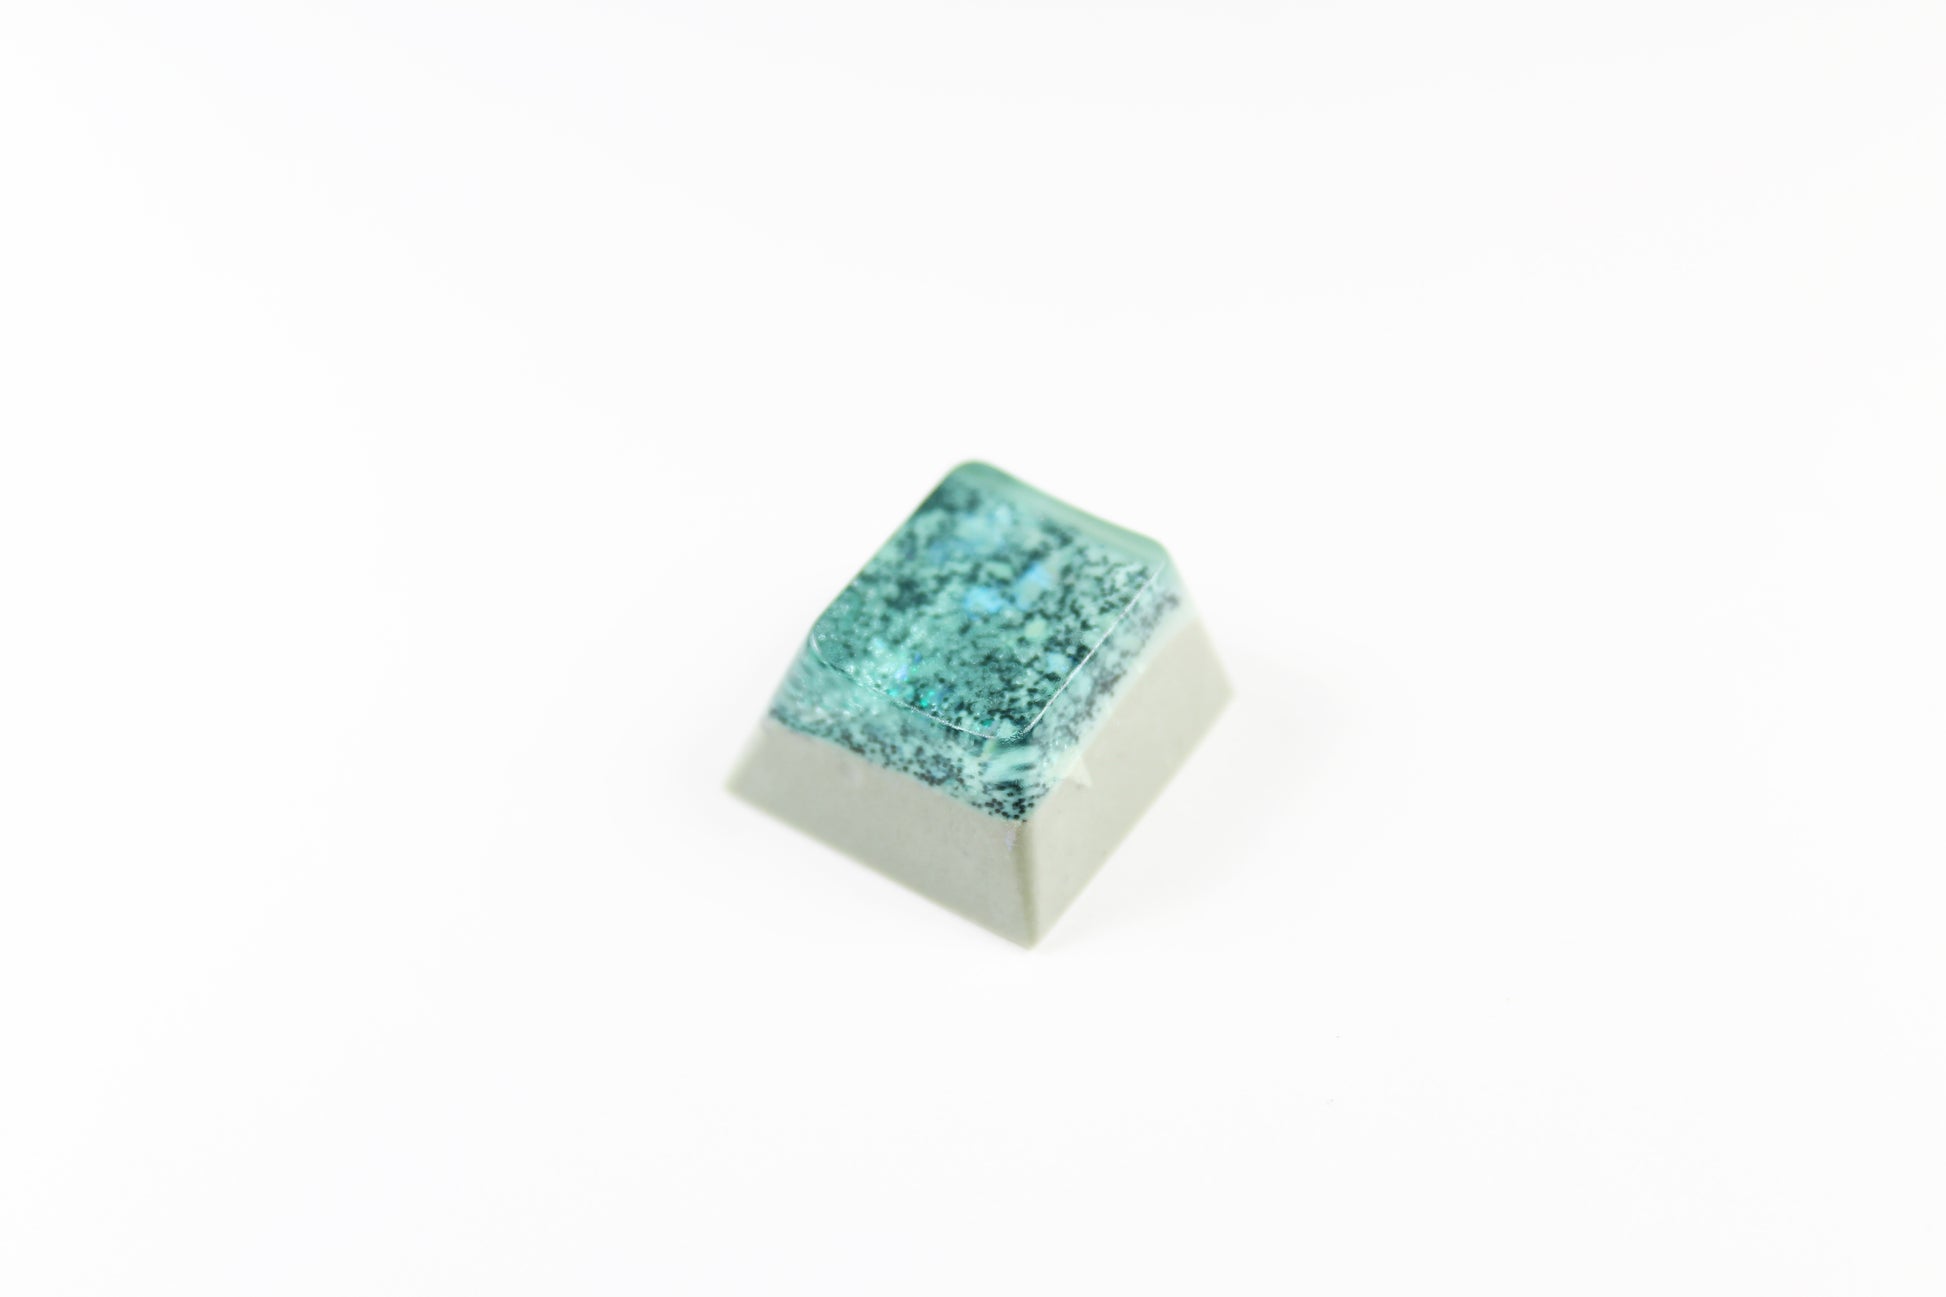 Cherry Esc - Anchor Point -5 - PrimeCaps Keycap - Blank and Sculpted Artisan Keycaps for cherry MX mechanical keyboards 